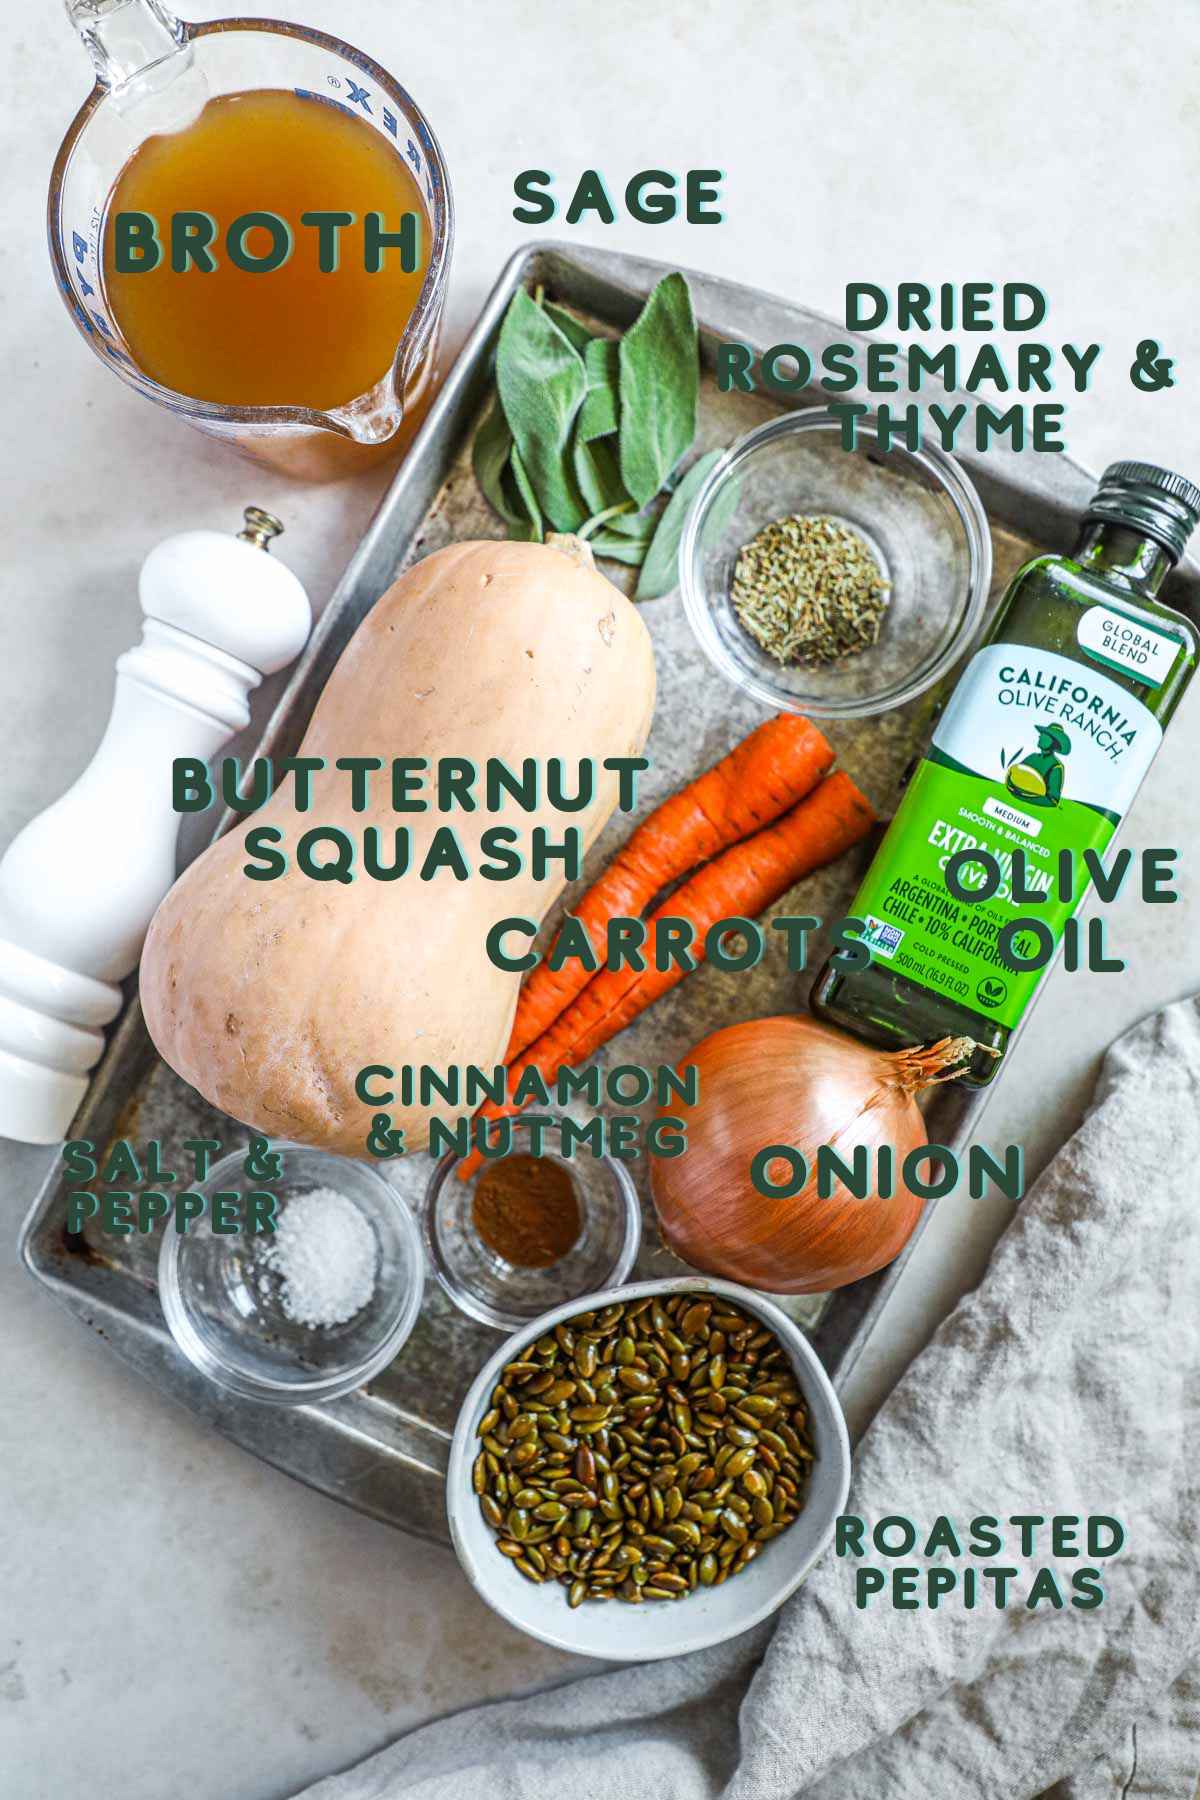 Ingredients to make spiced vegan butternut squash soup in a Vitamix.